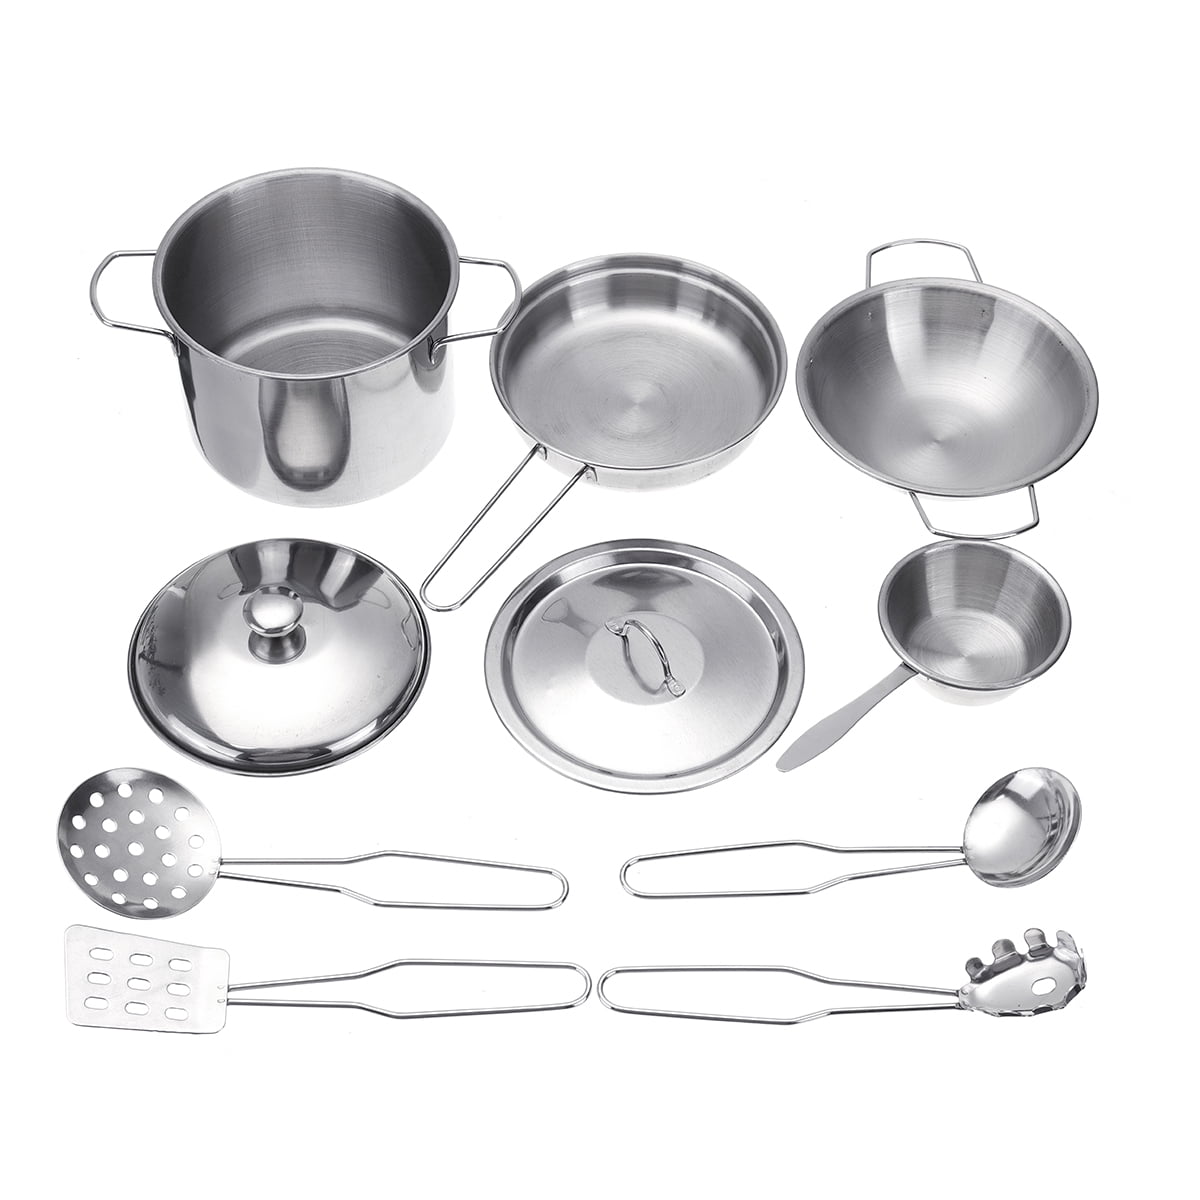 Stainless Pretend&Play Children Kitchen Dishes Set Toys For Kids Blue 11pcs 